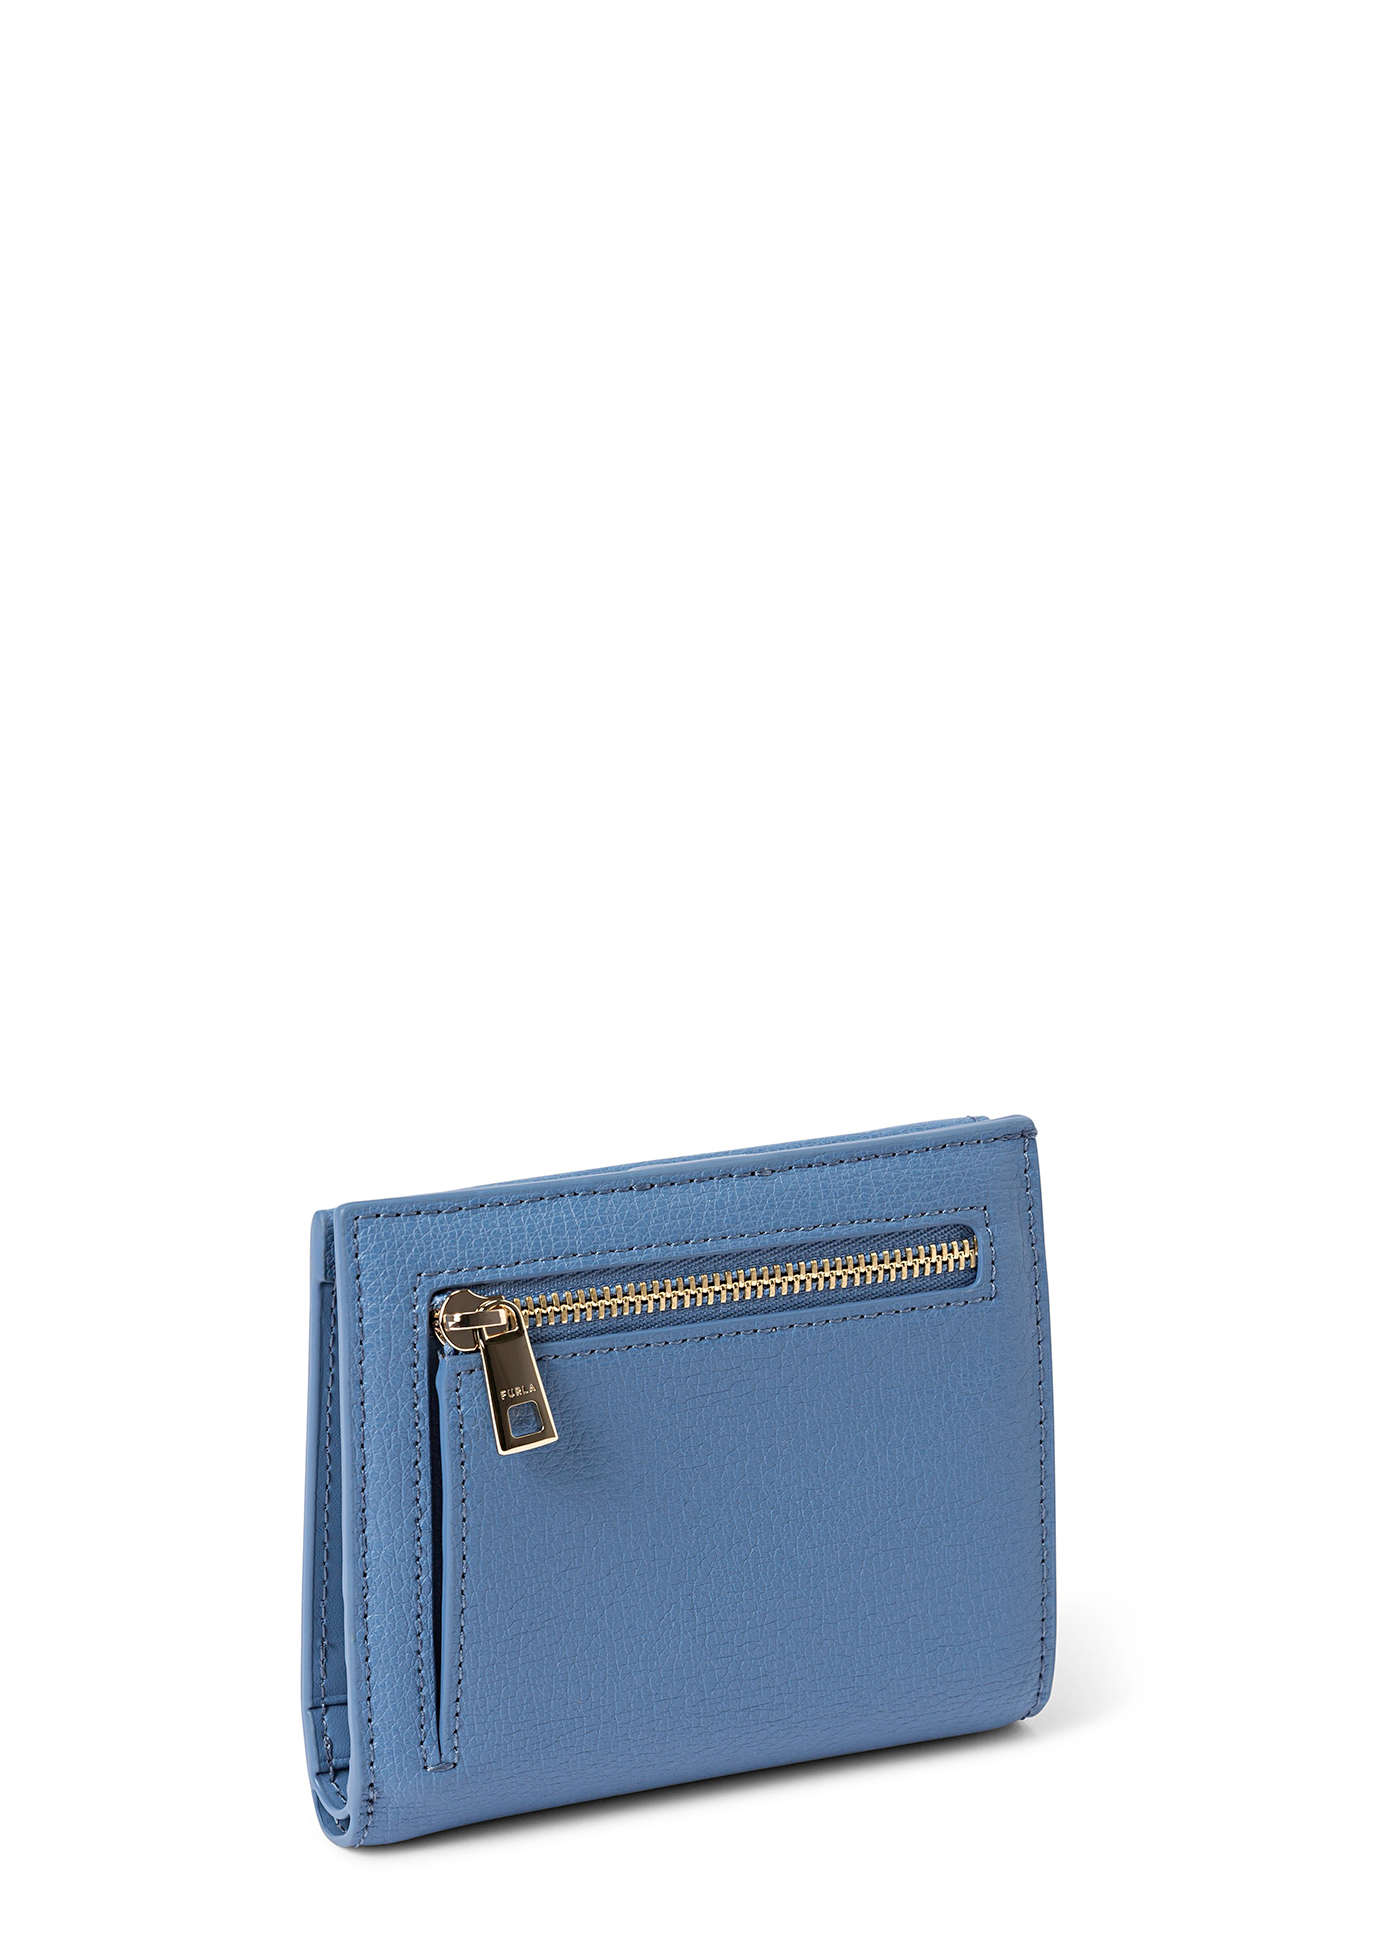 FURLA PALAZZO S COMPACT WALLET image number 1